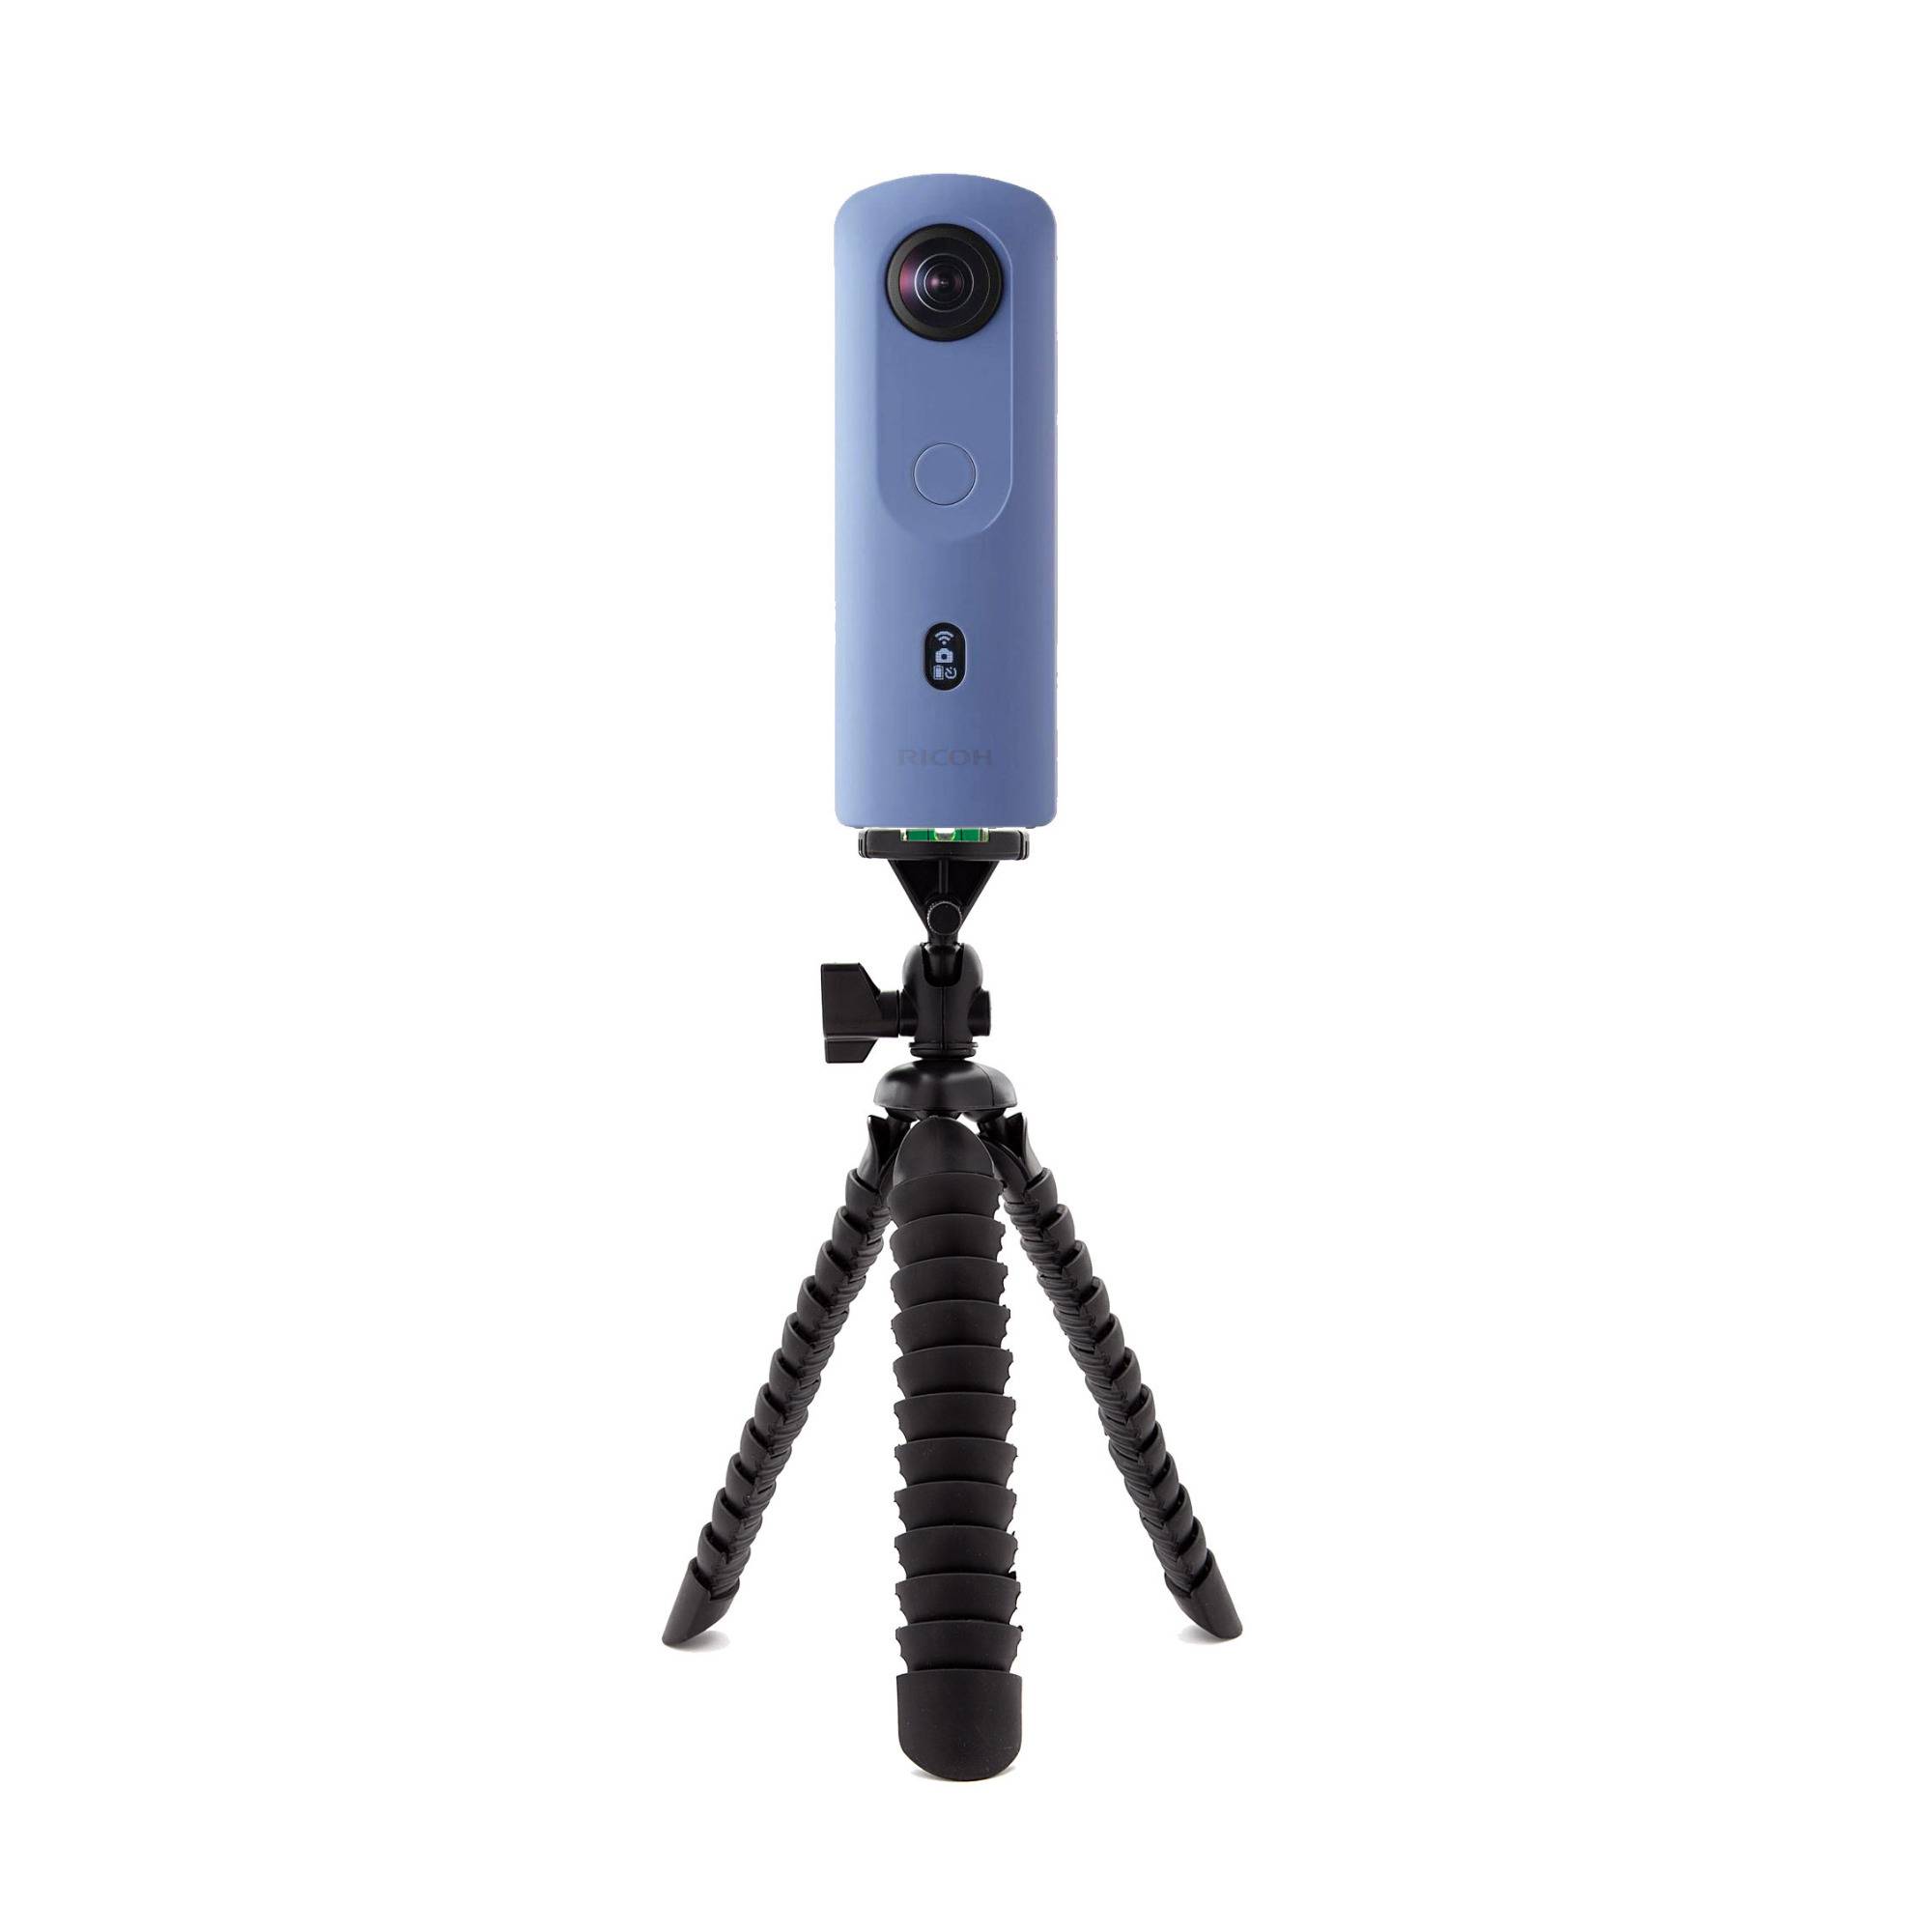 Ricoh Theta SC2 360-Degree 4K Spherical VR Camera (Blue) with Flexible 10-Inch Spider Tripod